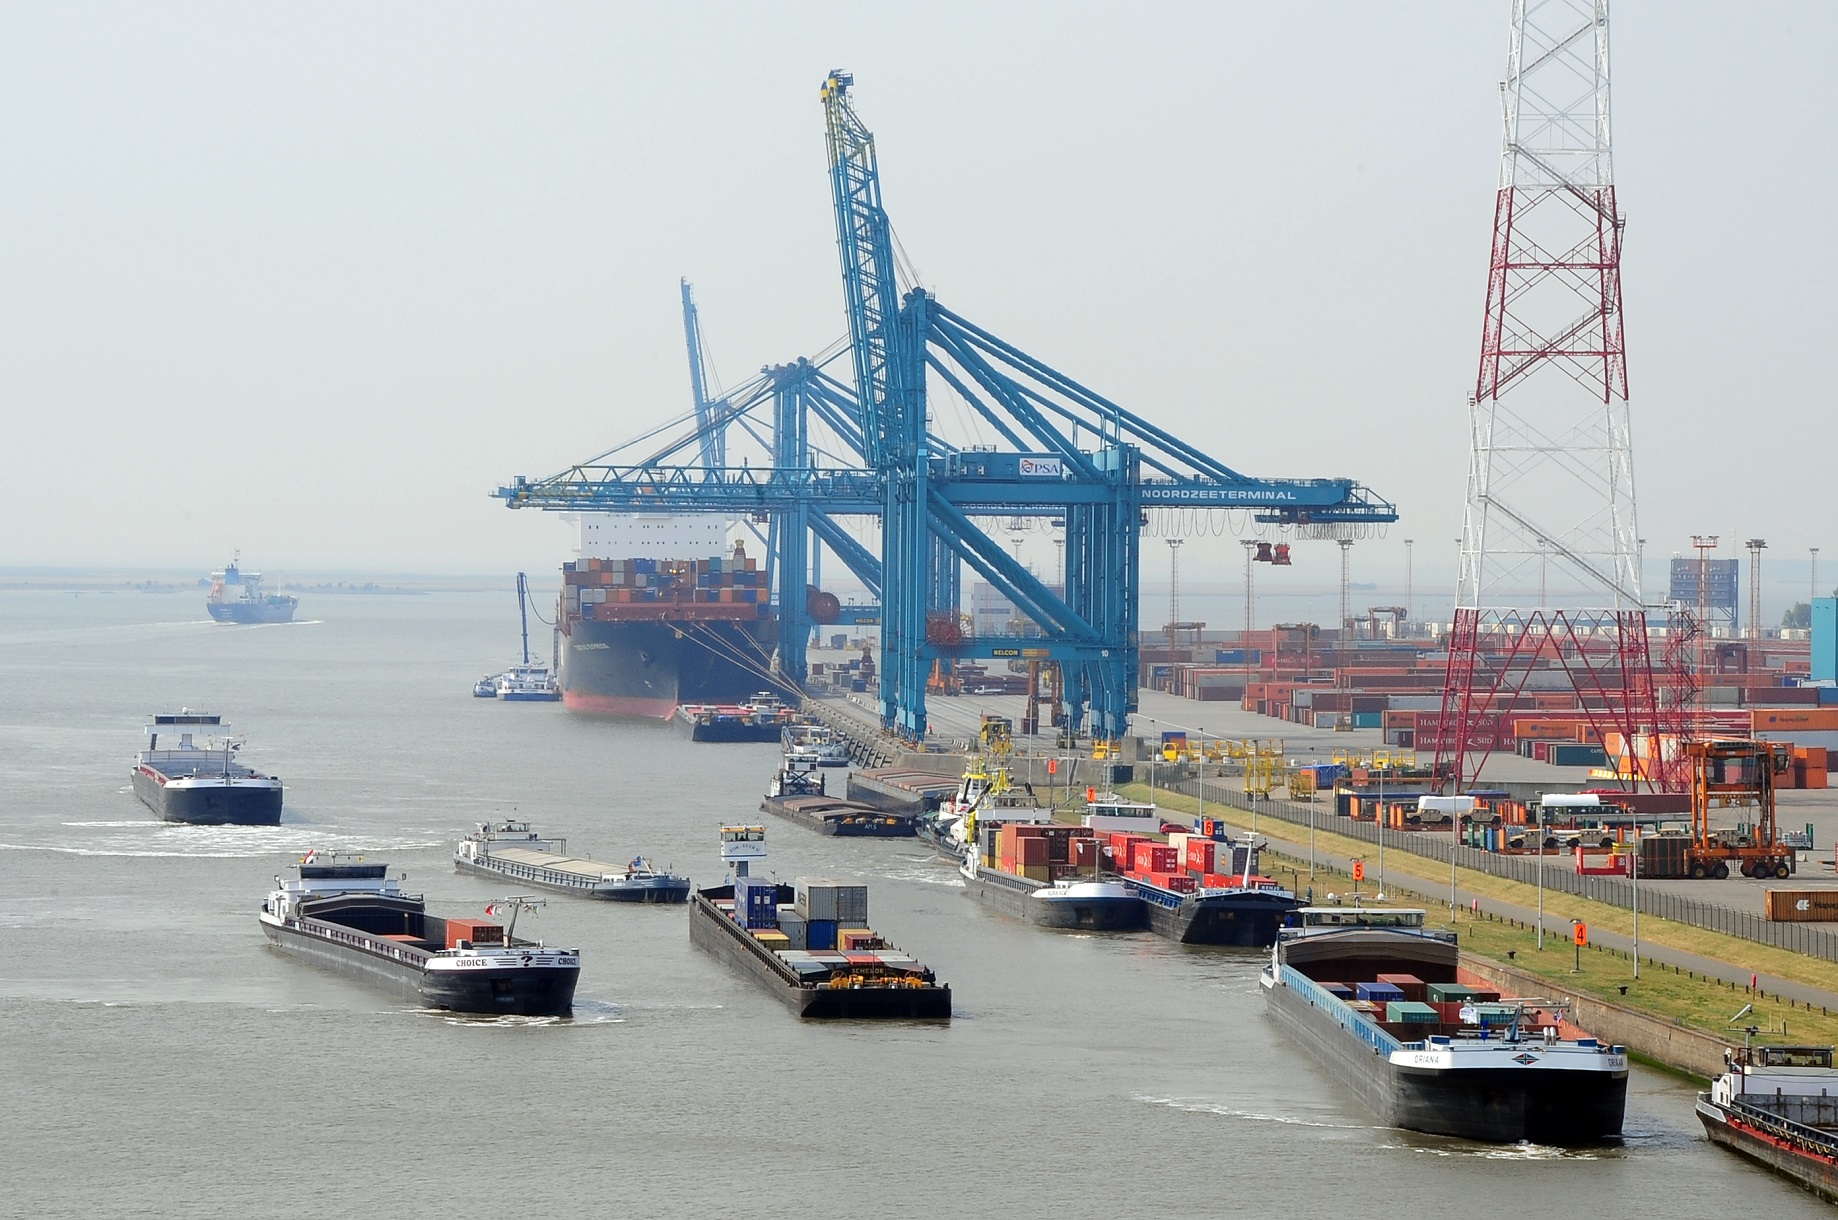 Port of Antwerp-Bruges launches world's first port drone network